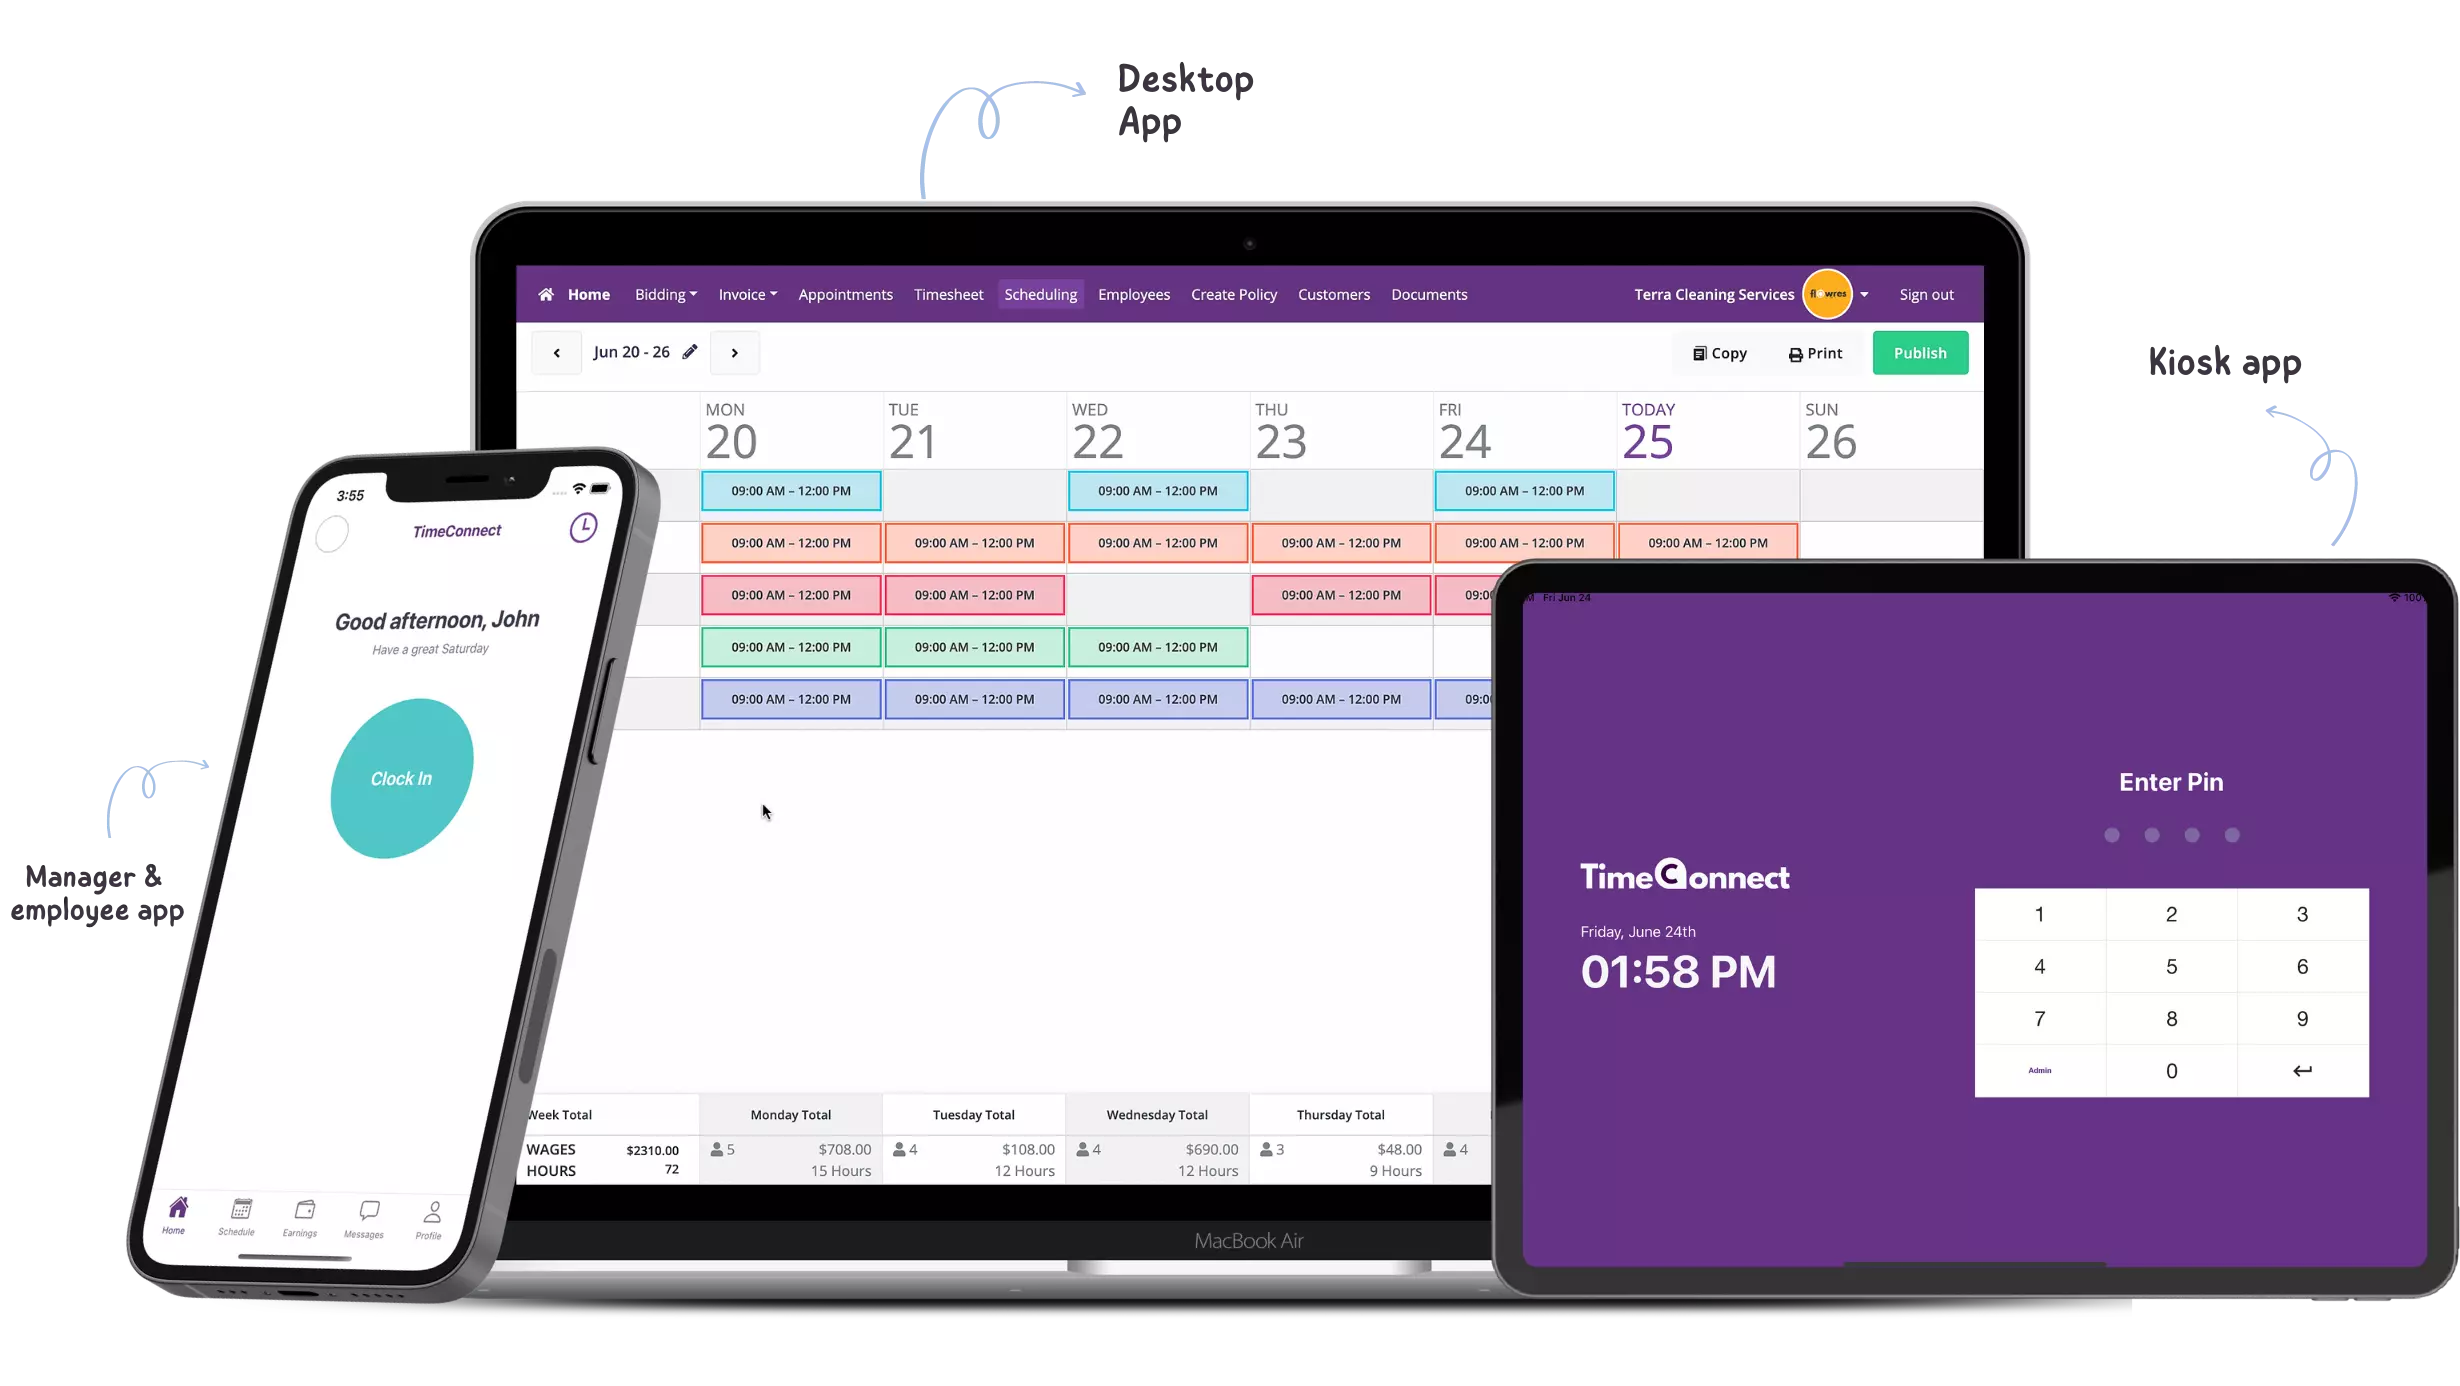 TimeConnect comes with suits of cleaning business apps including employee kiosk app, manager app, employee app and TimeConnect dashboard where manager can create bidding proposals and manage employee timesheets.